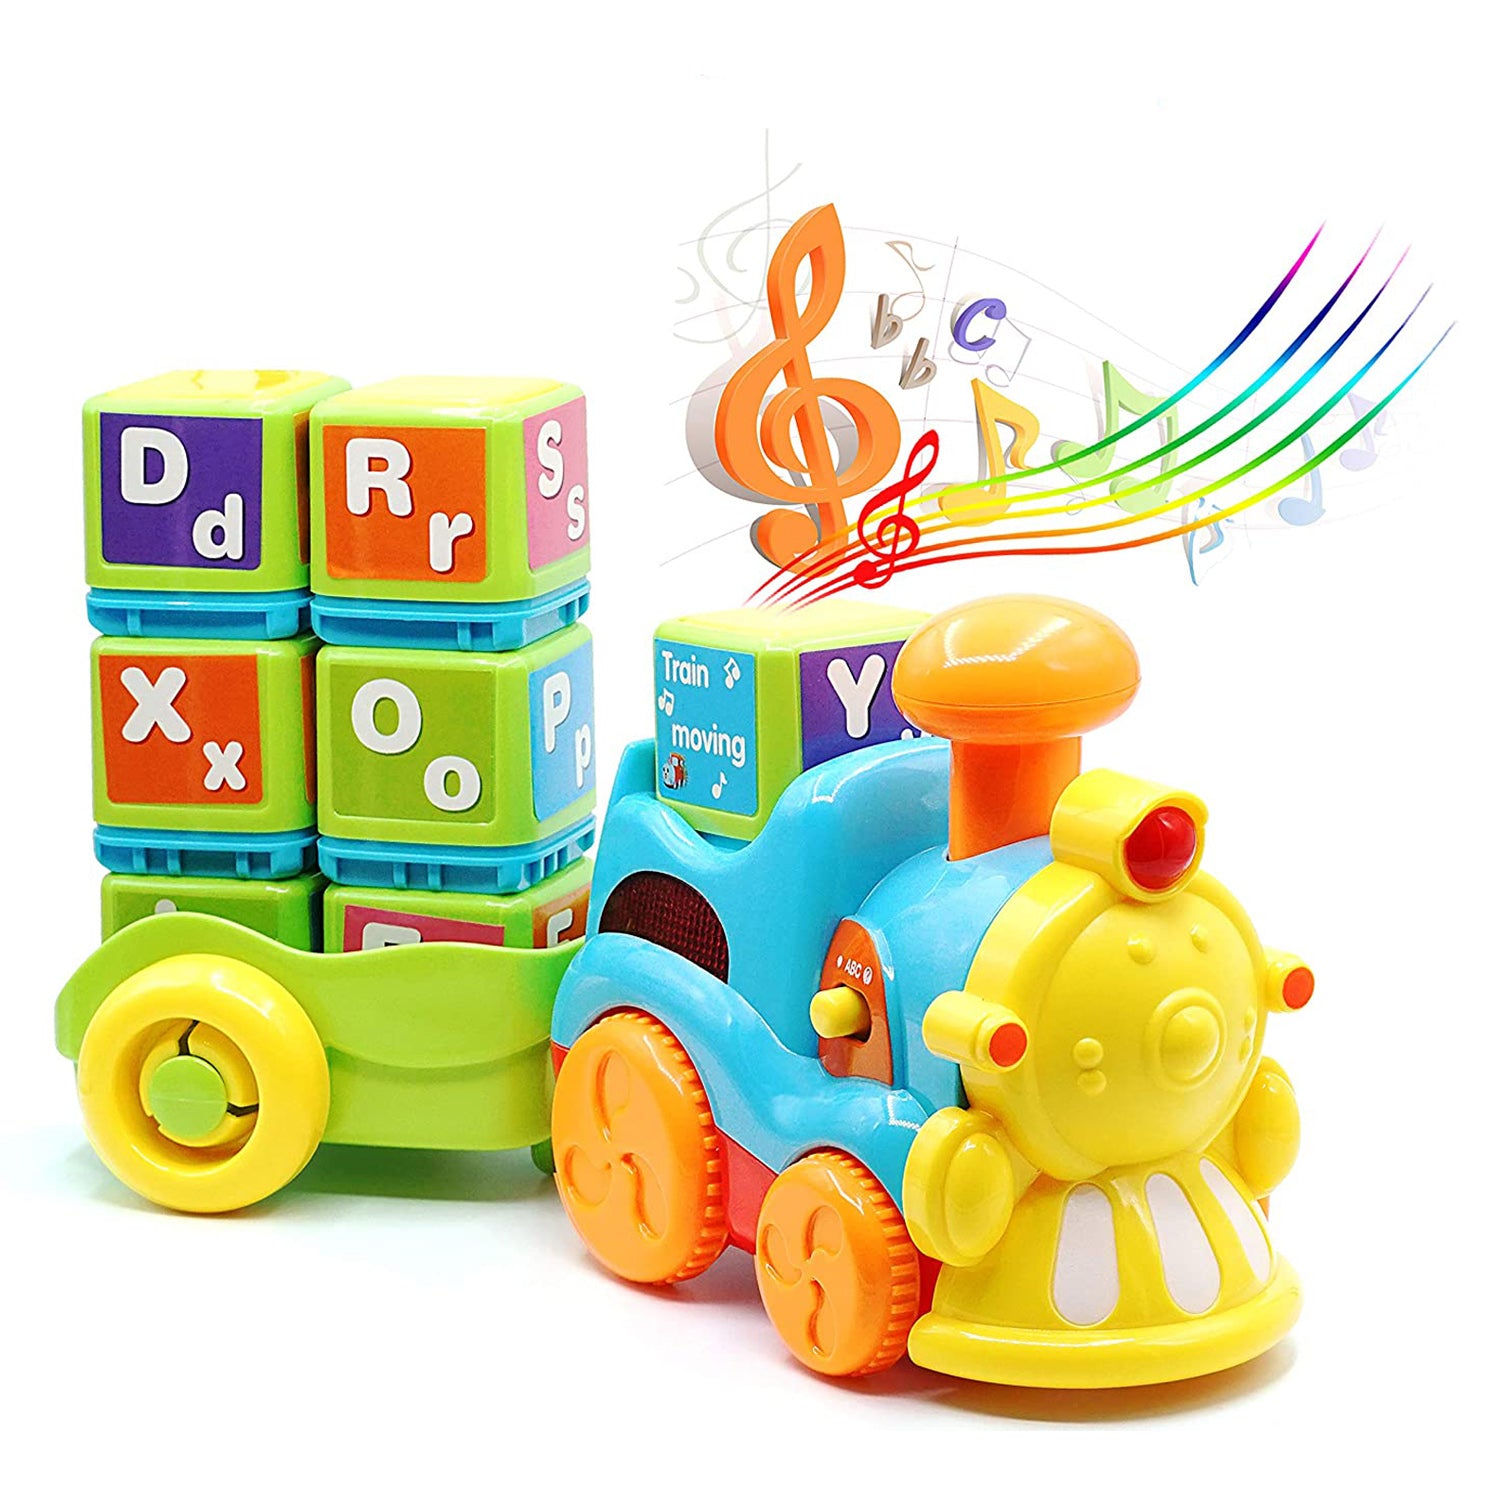 Cognitive Development, Toys for Babies & Toddlers